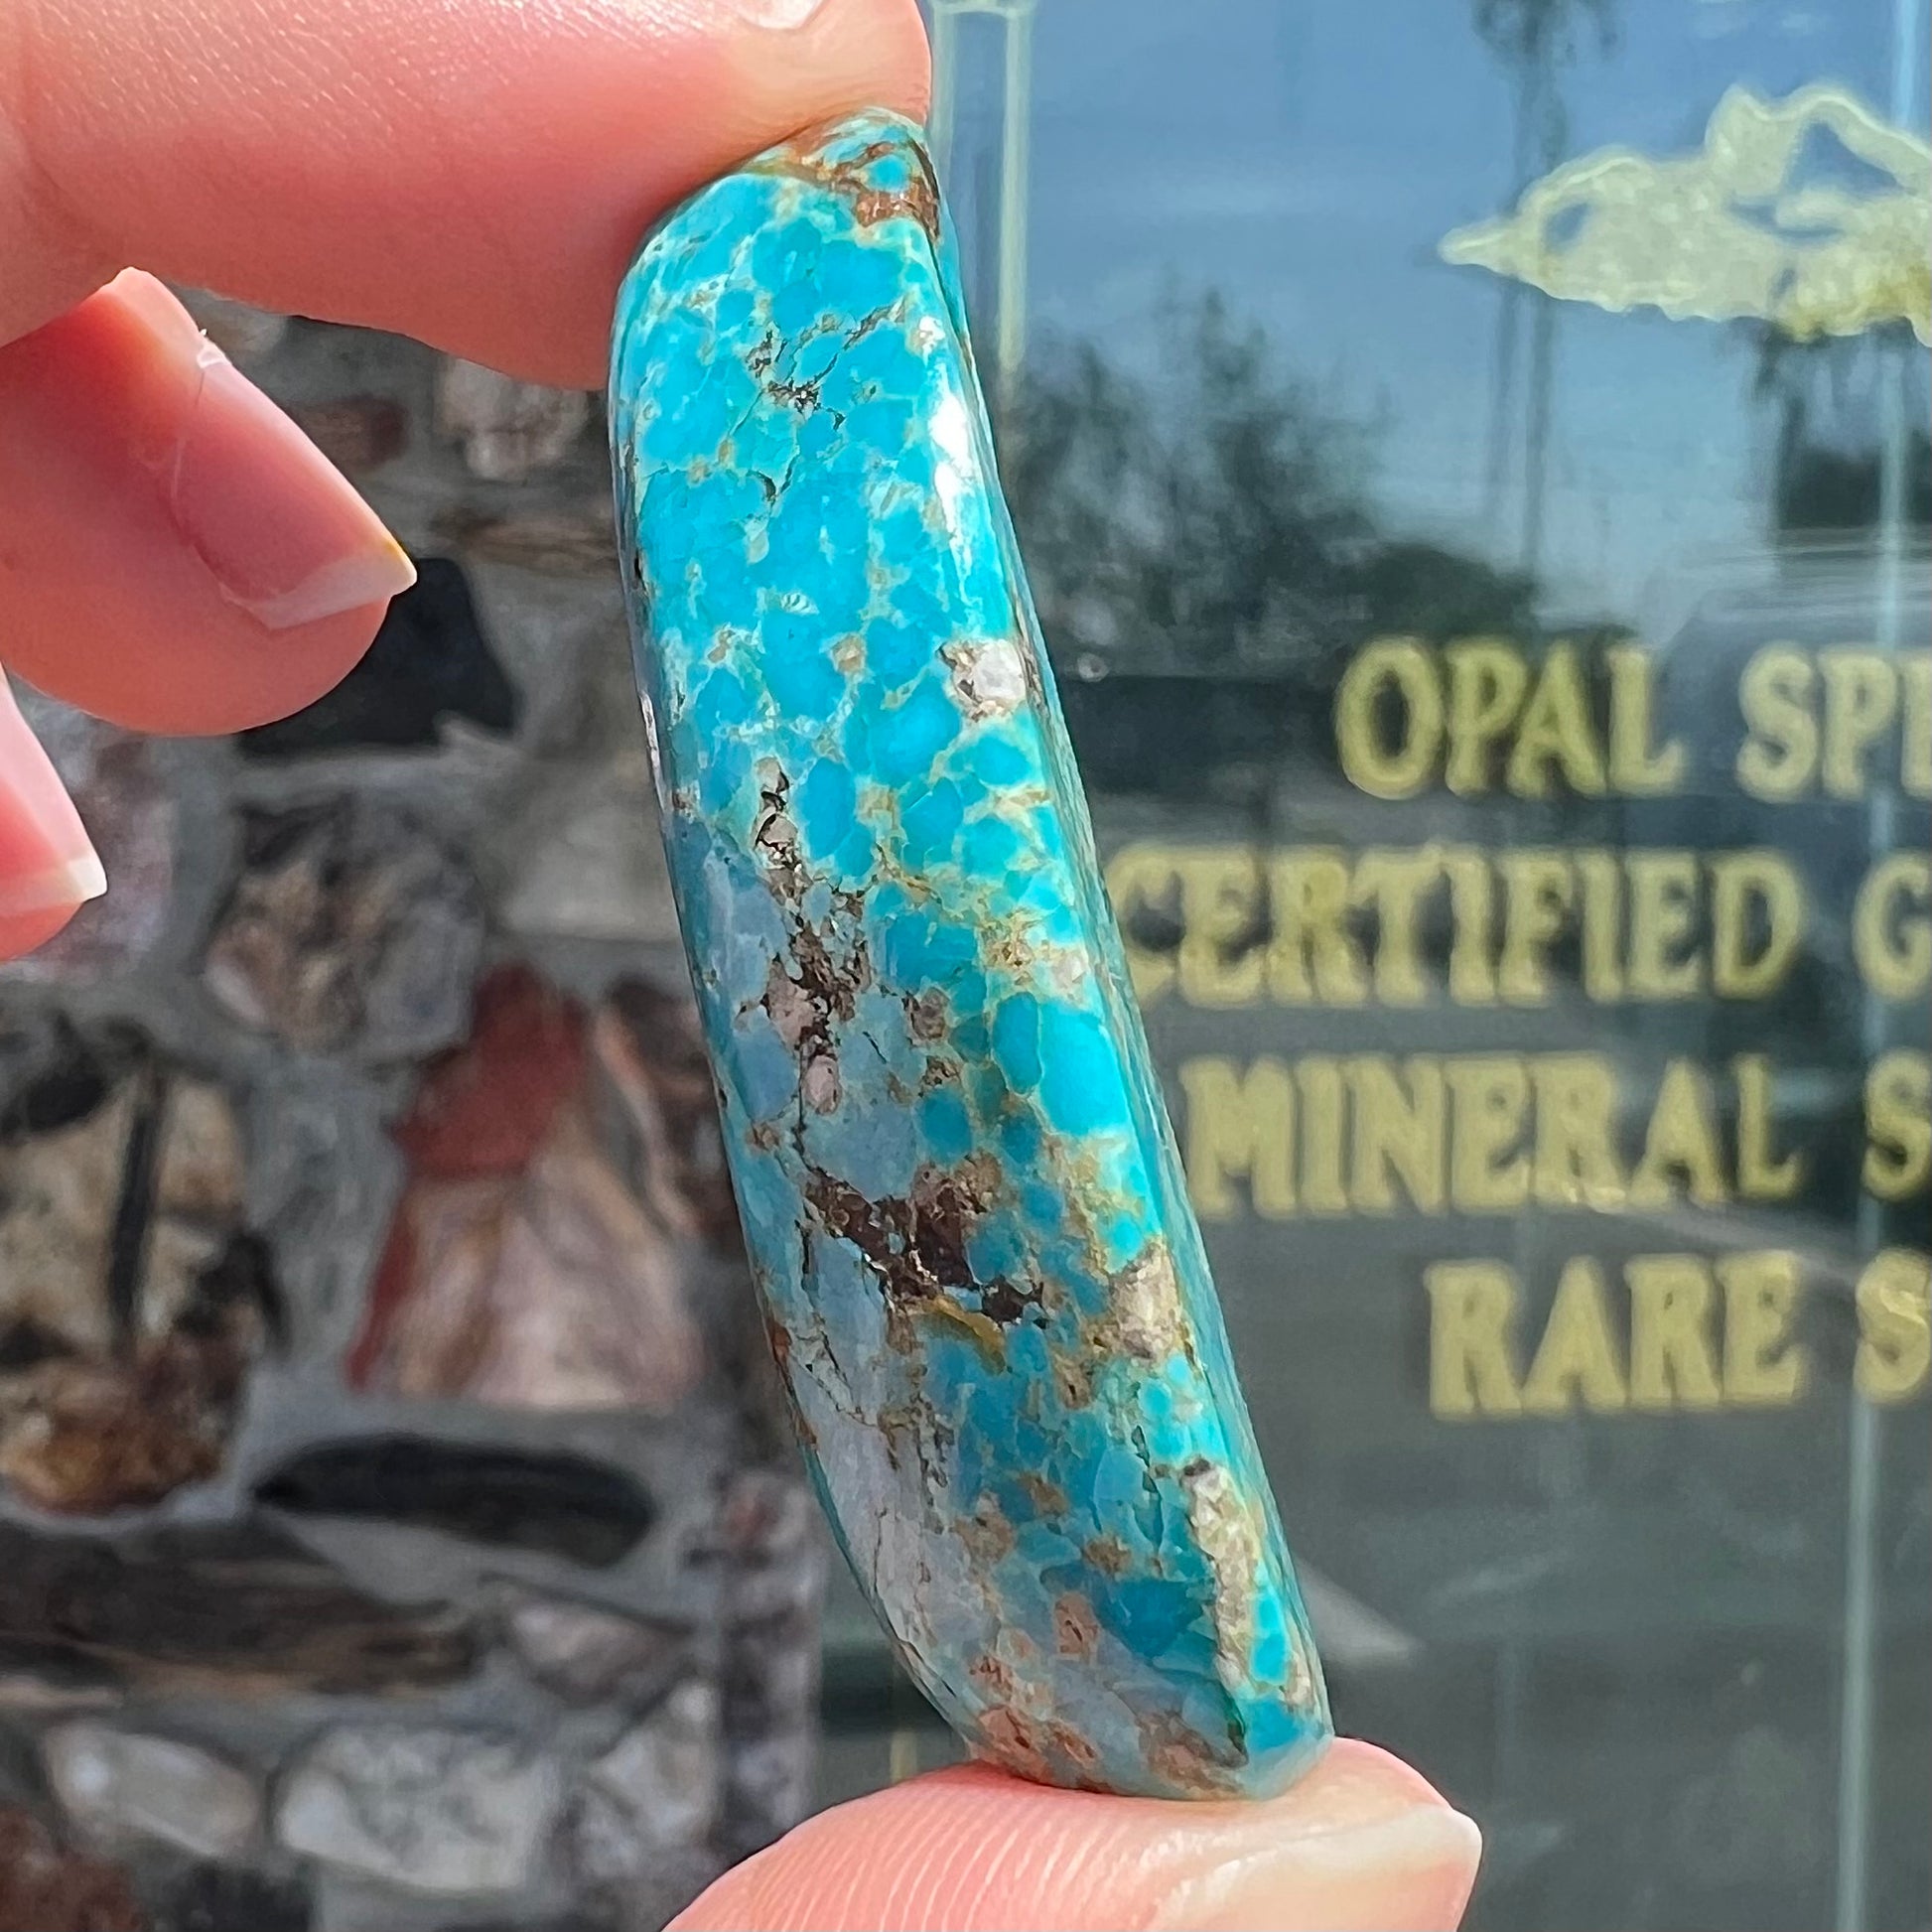 A loose, freeform cabochon cut Kingman turquoise stone from Arizona.  The stone is blue with gray and brown matrix.